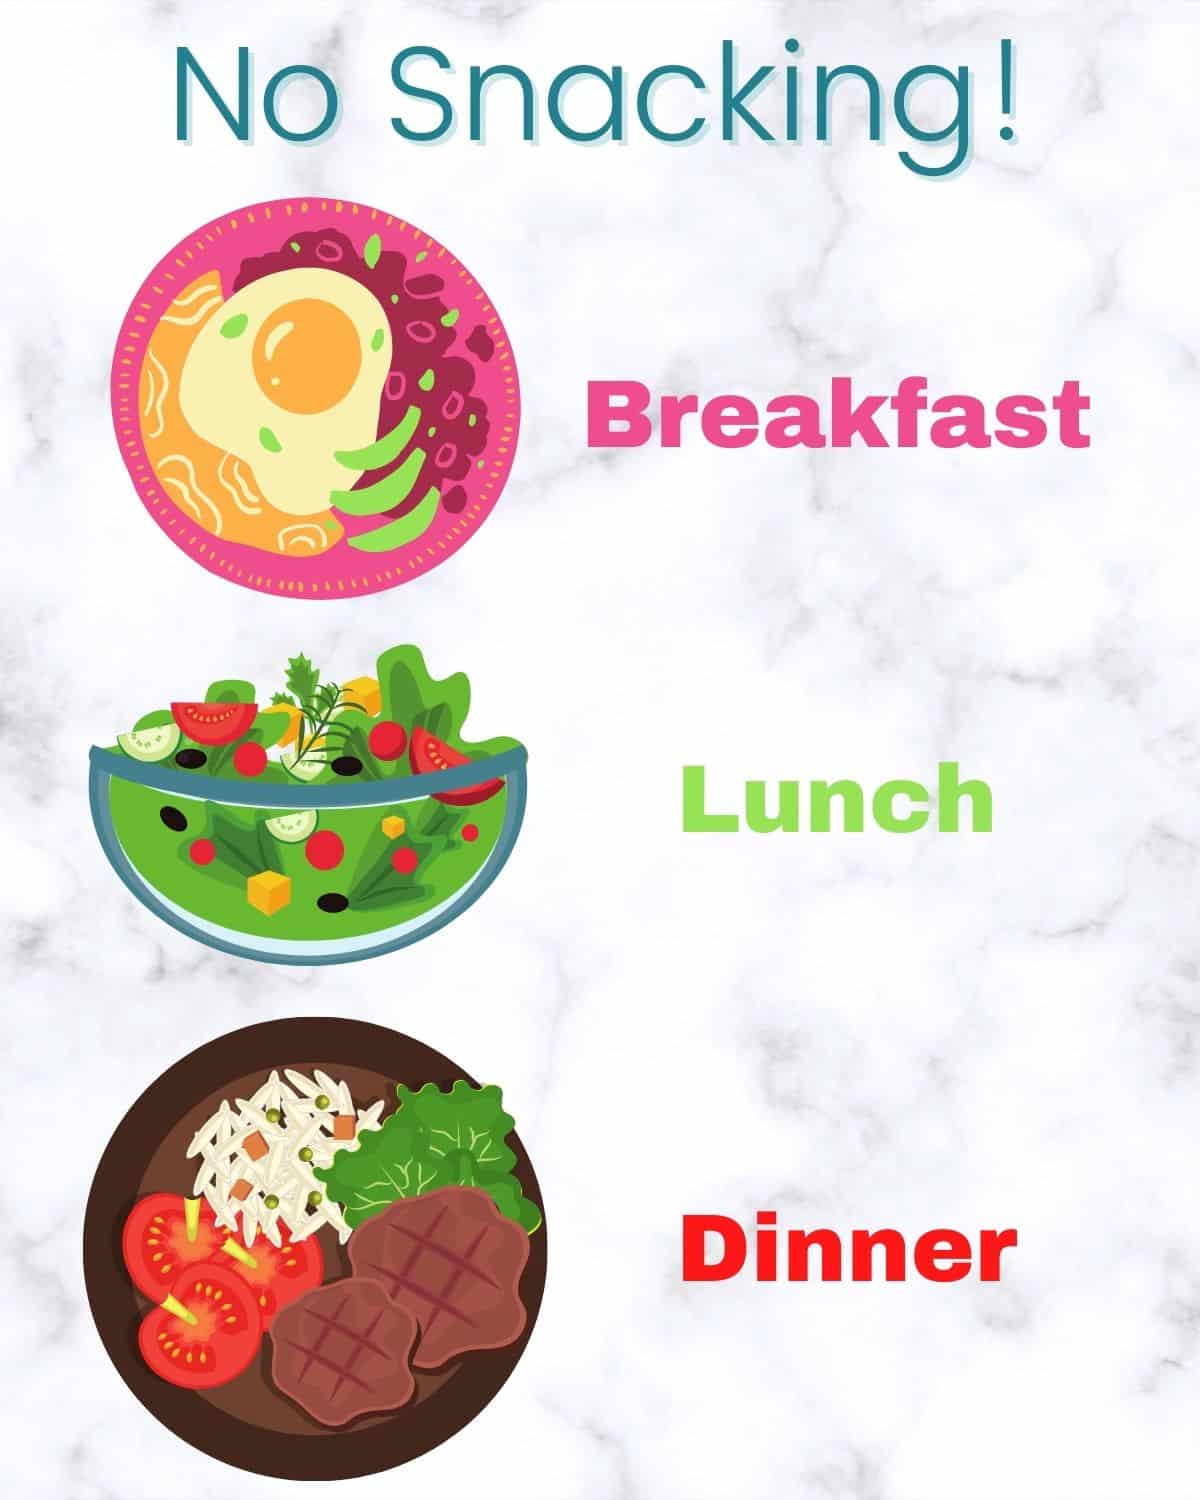 picture of 3 meals with the text "no snacking!"